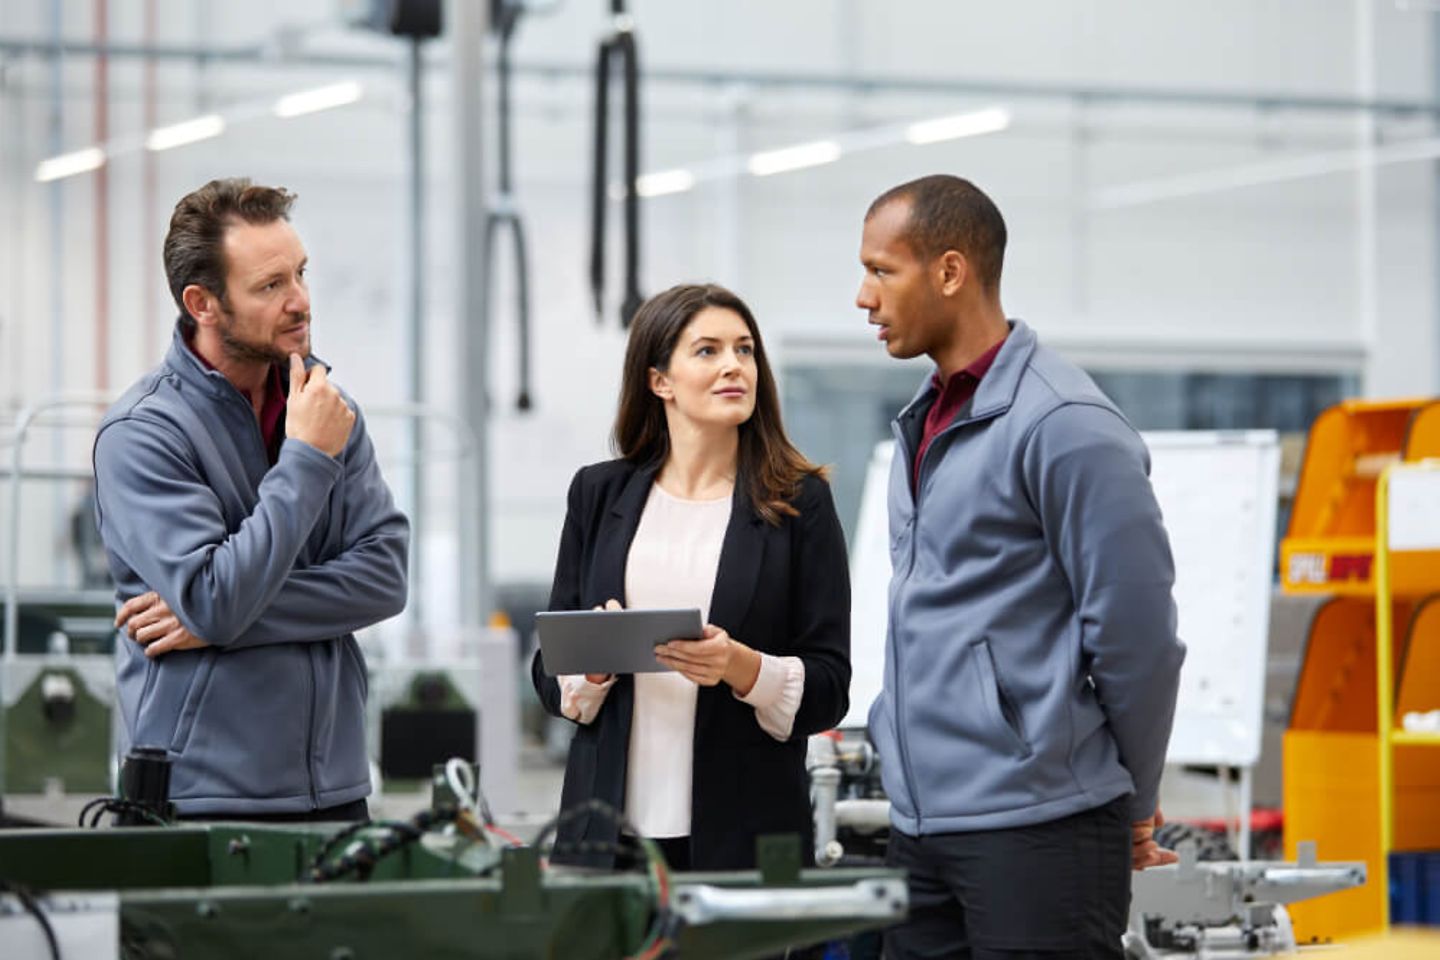 Car engineer in discussion with colleagues in the car factory